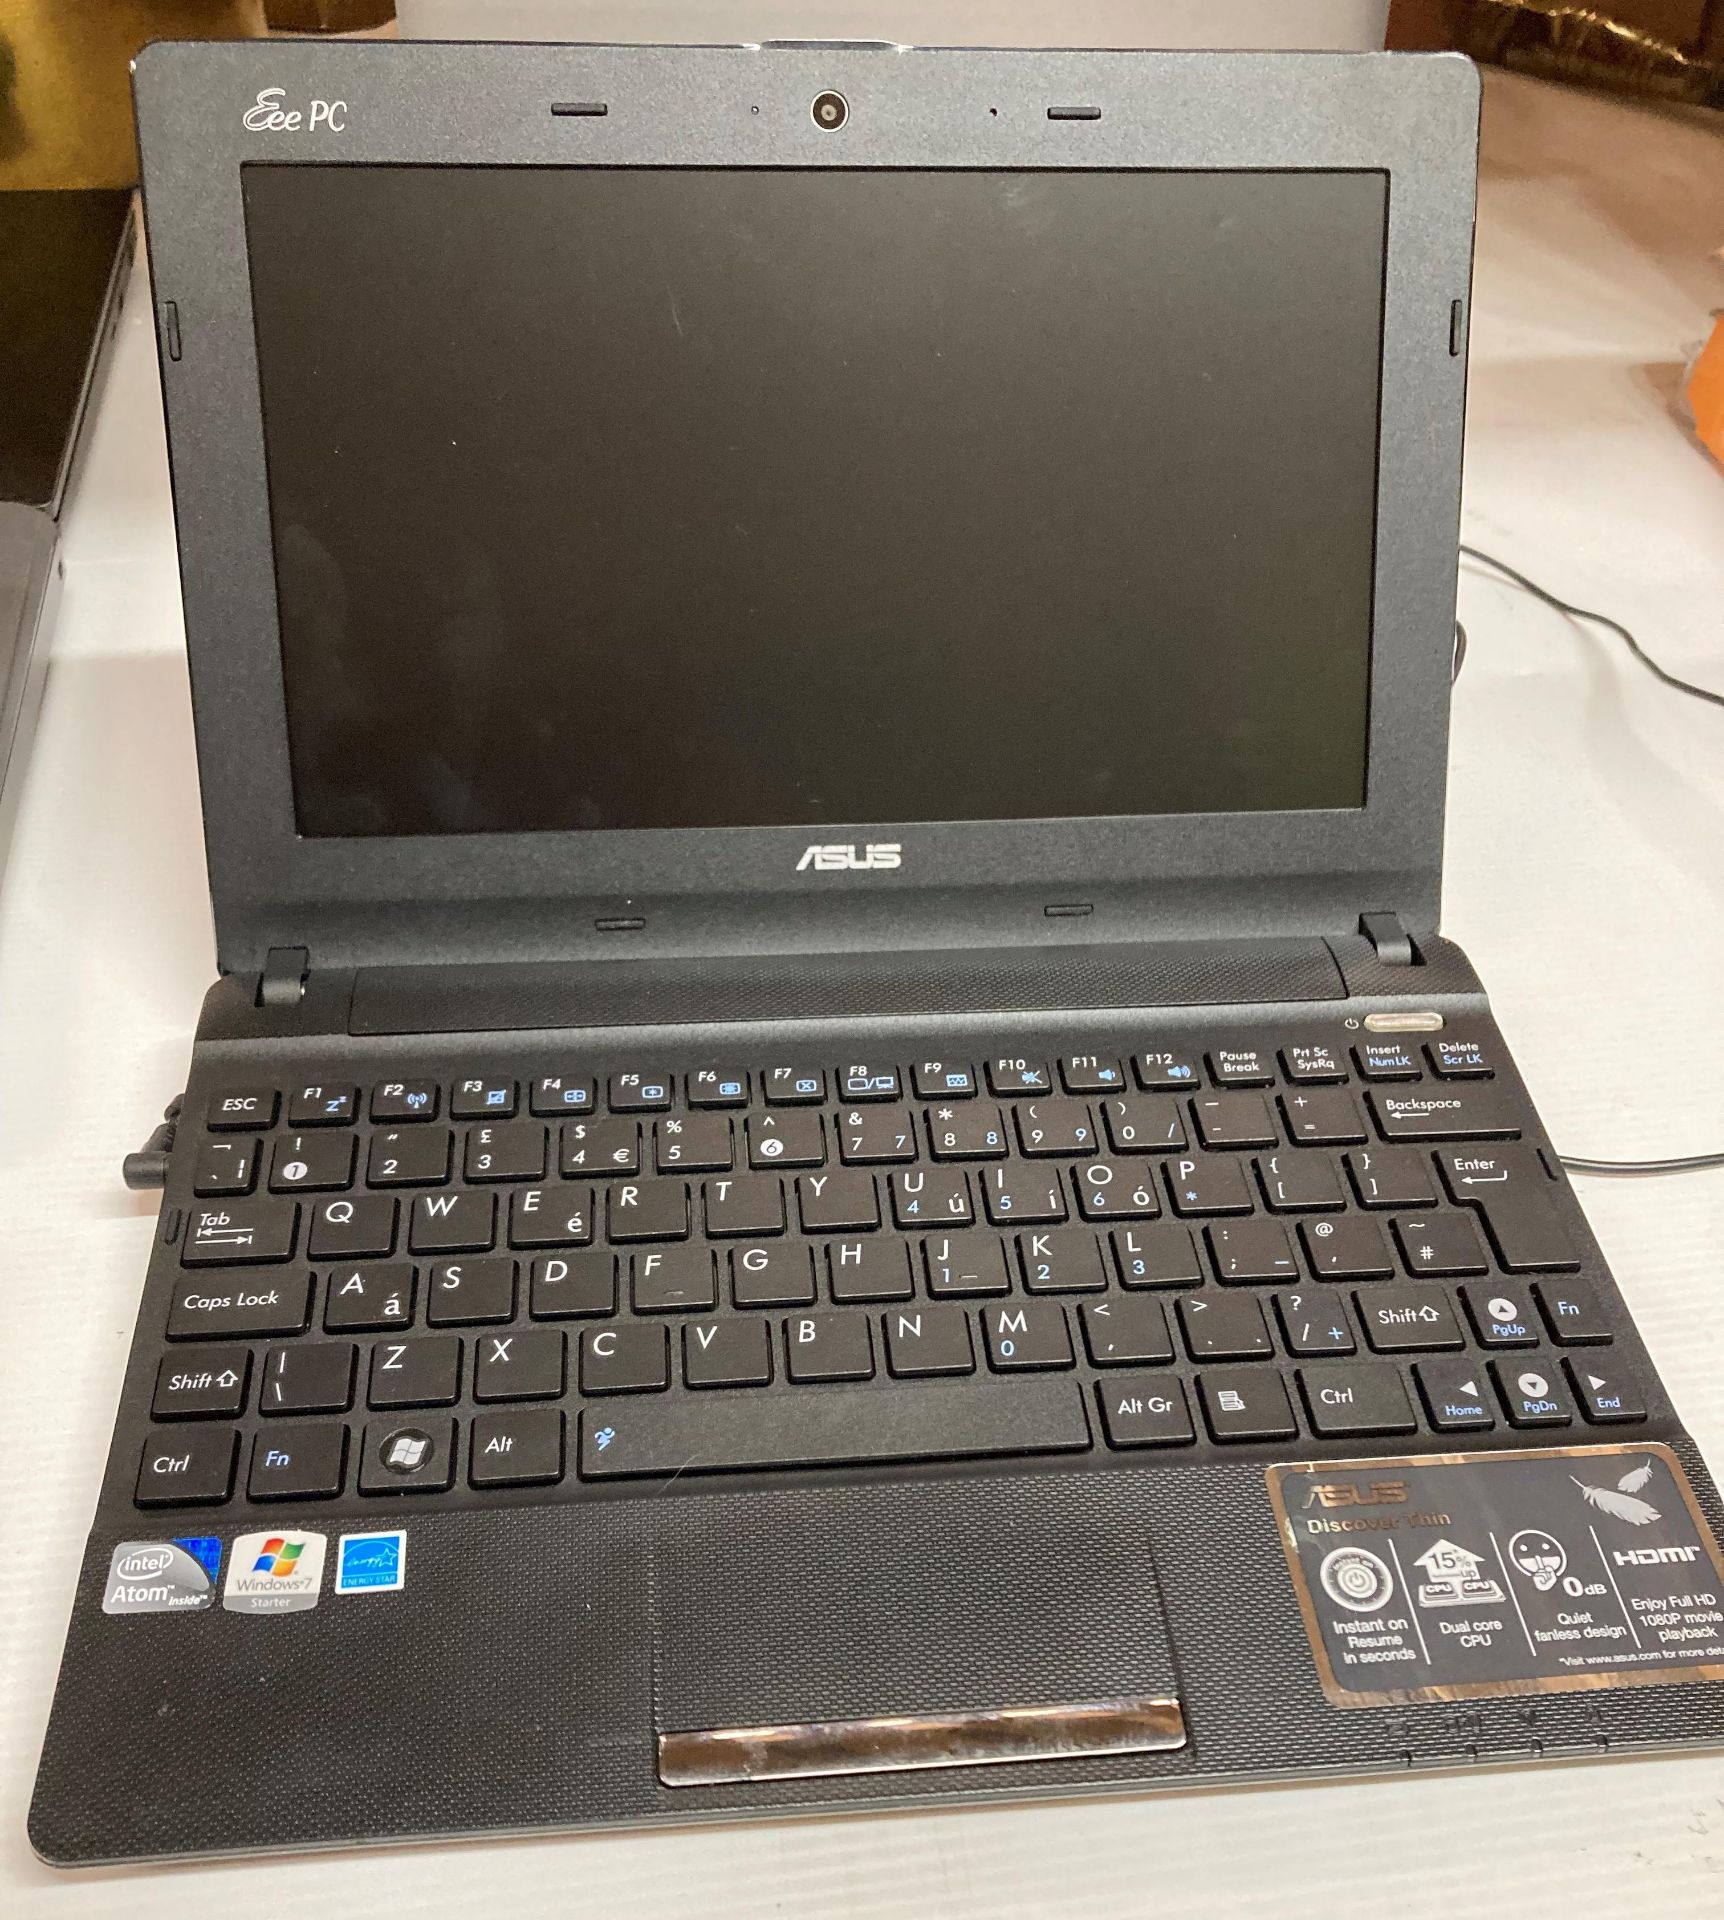 Asus laptop Intel Atom - complete with power lead (M12) - Image 2 of 2